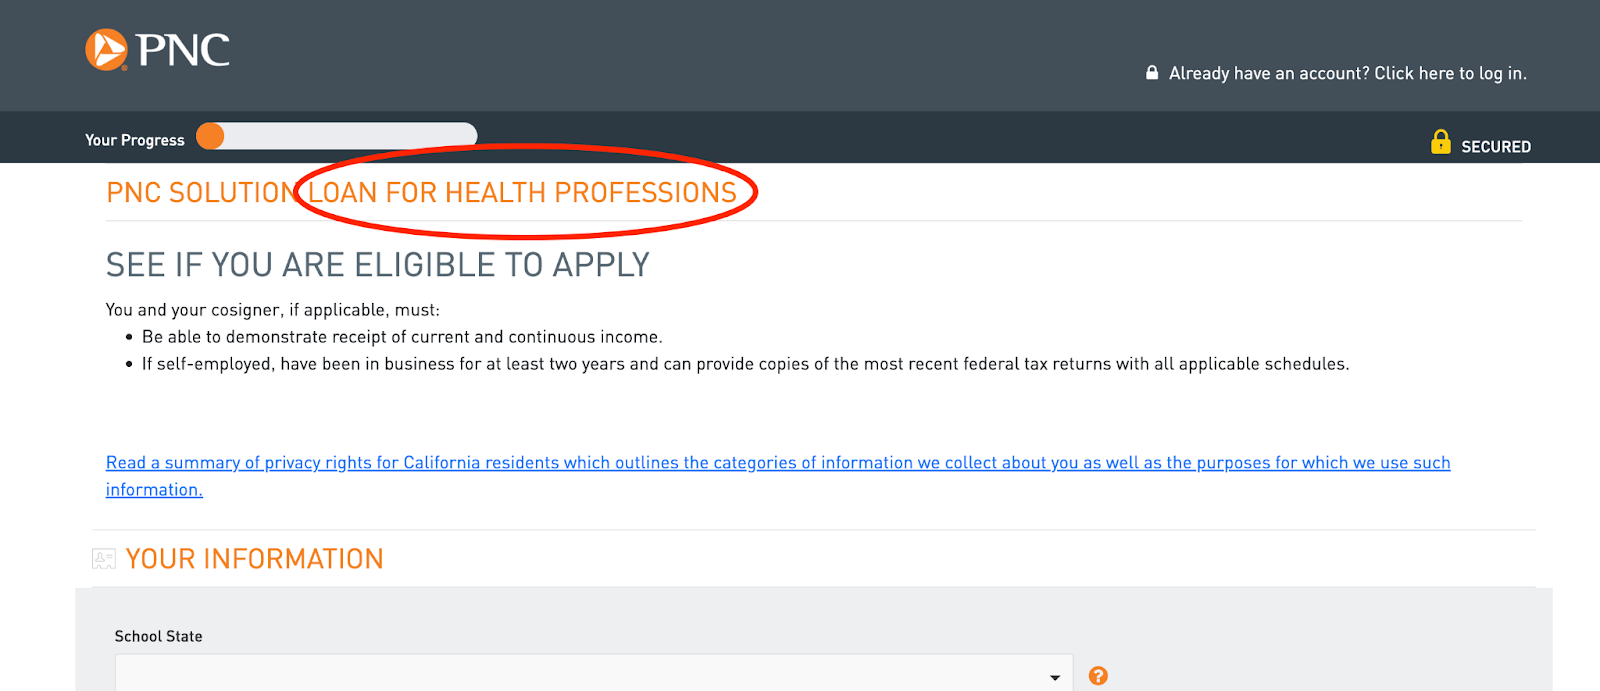 A screenshot of the PNC website emphasizing its solution loan for health professions